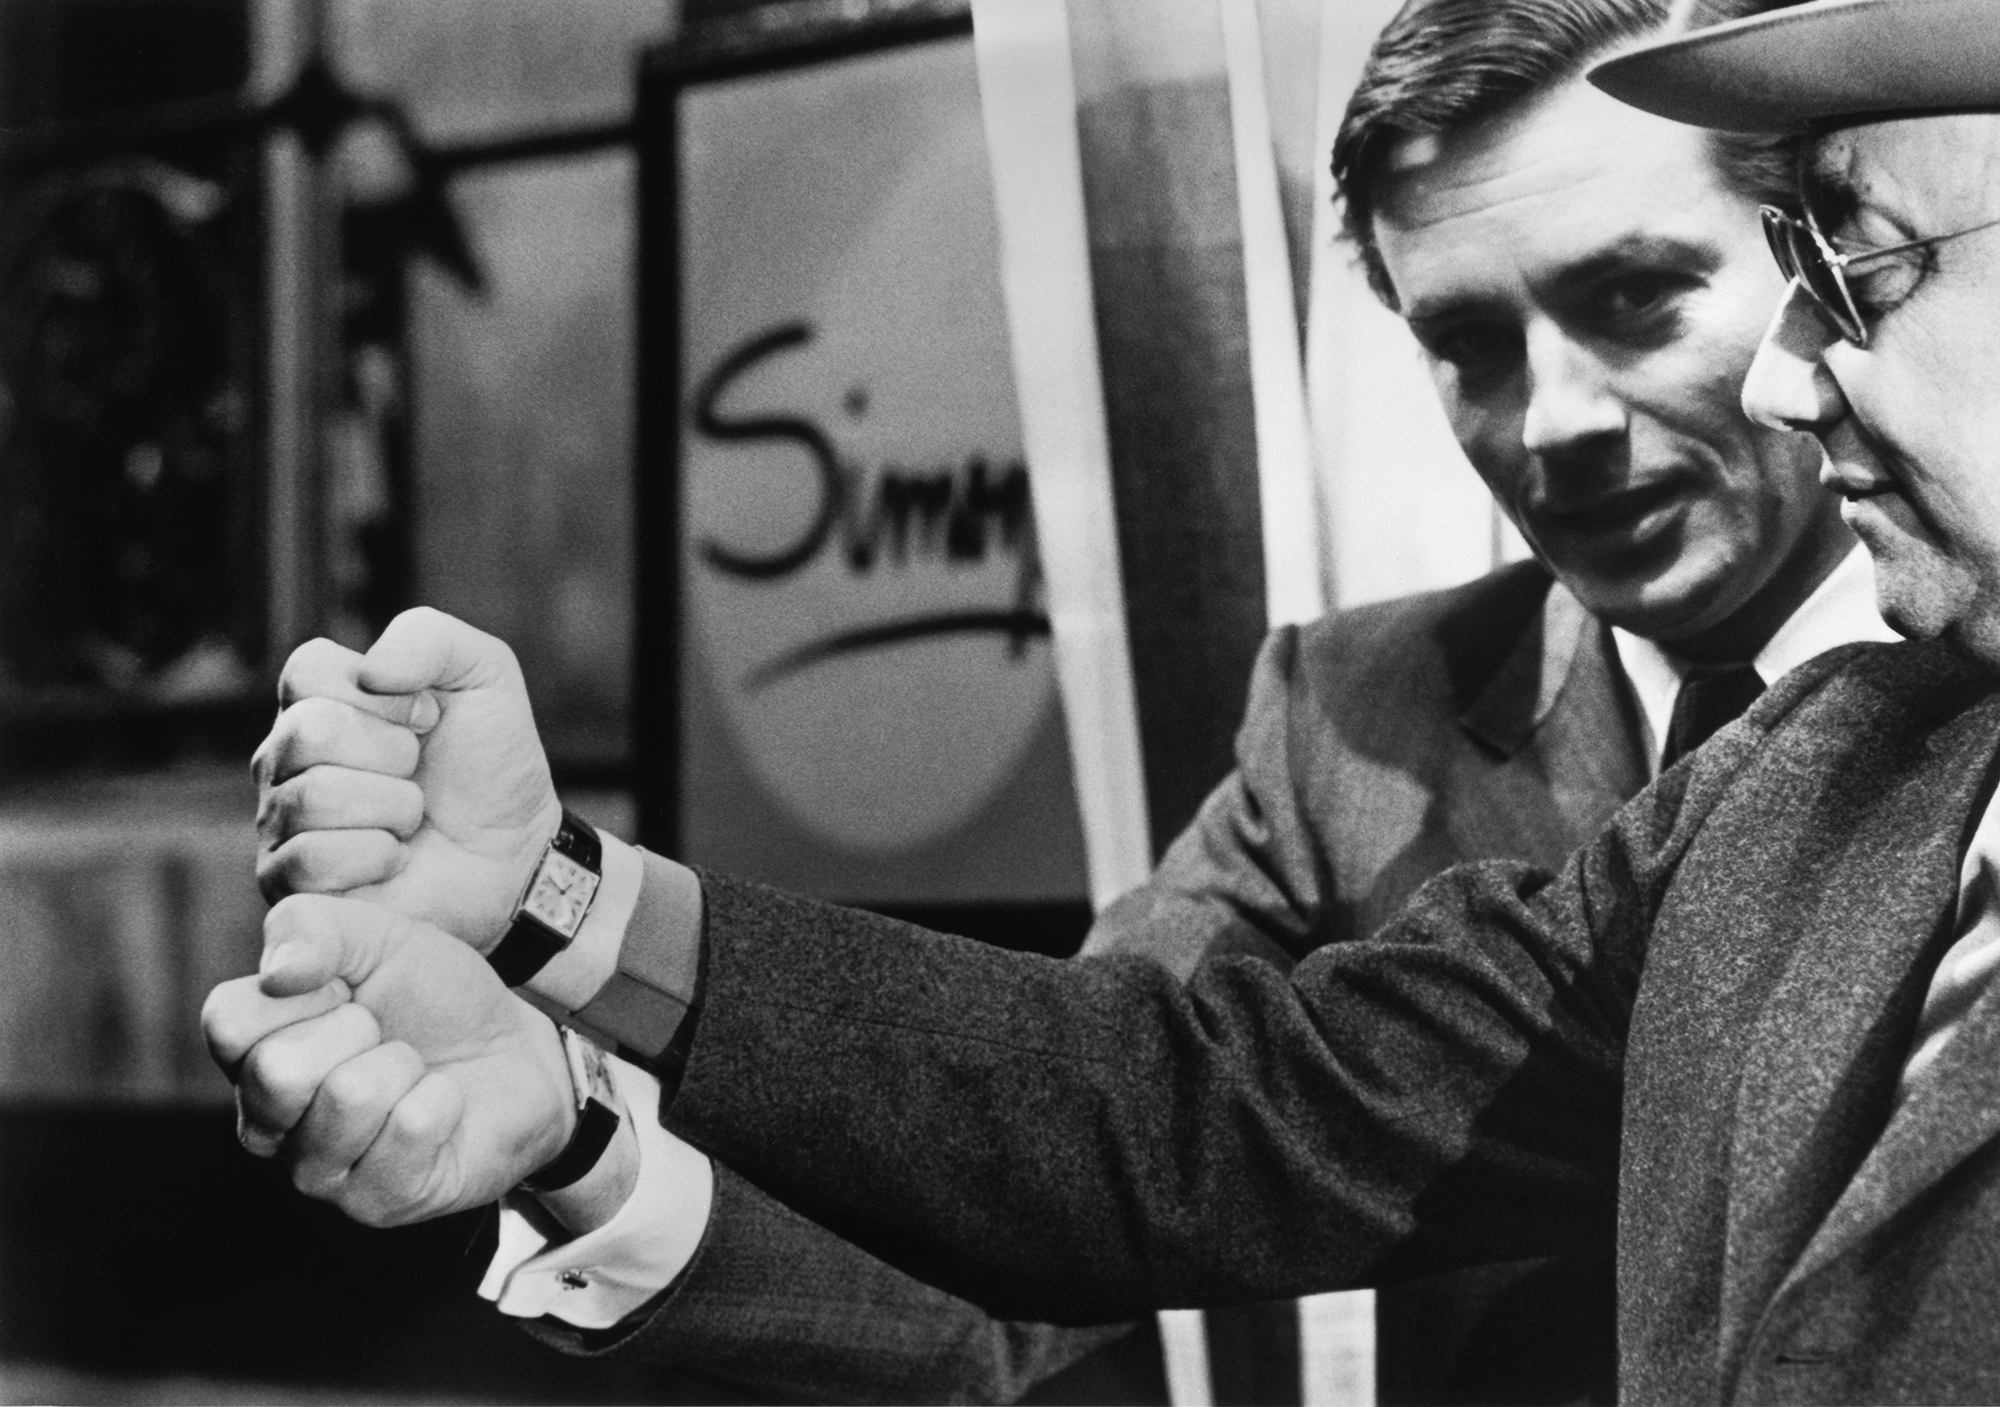 Alain Delon and Jean-Pierre Melville, both wearing the Cartier Tank watch that turns 100 this year